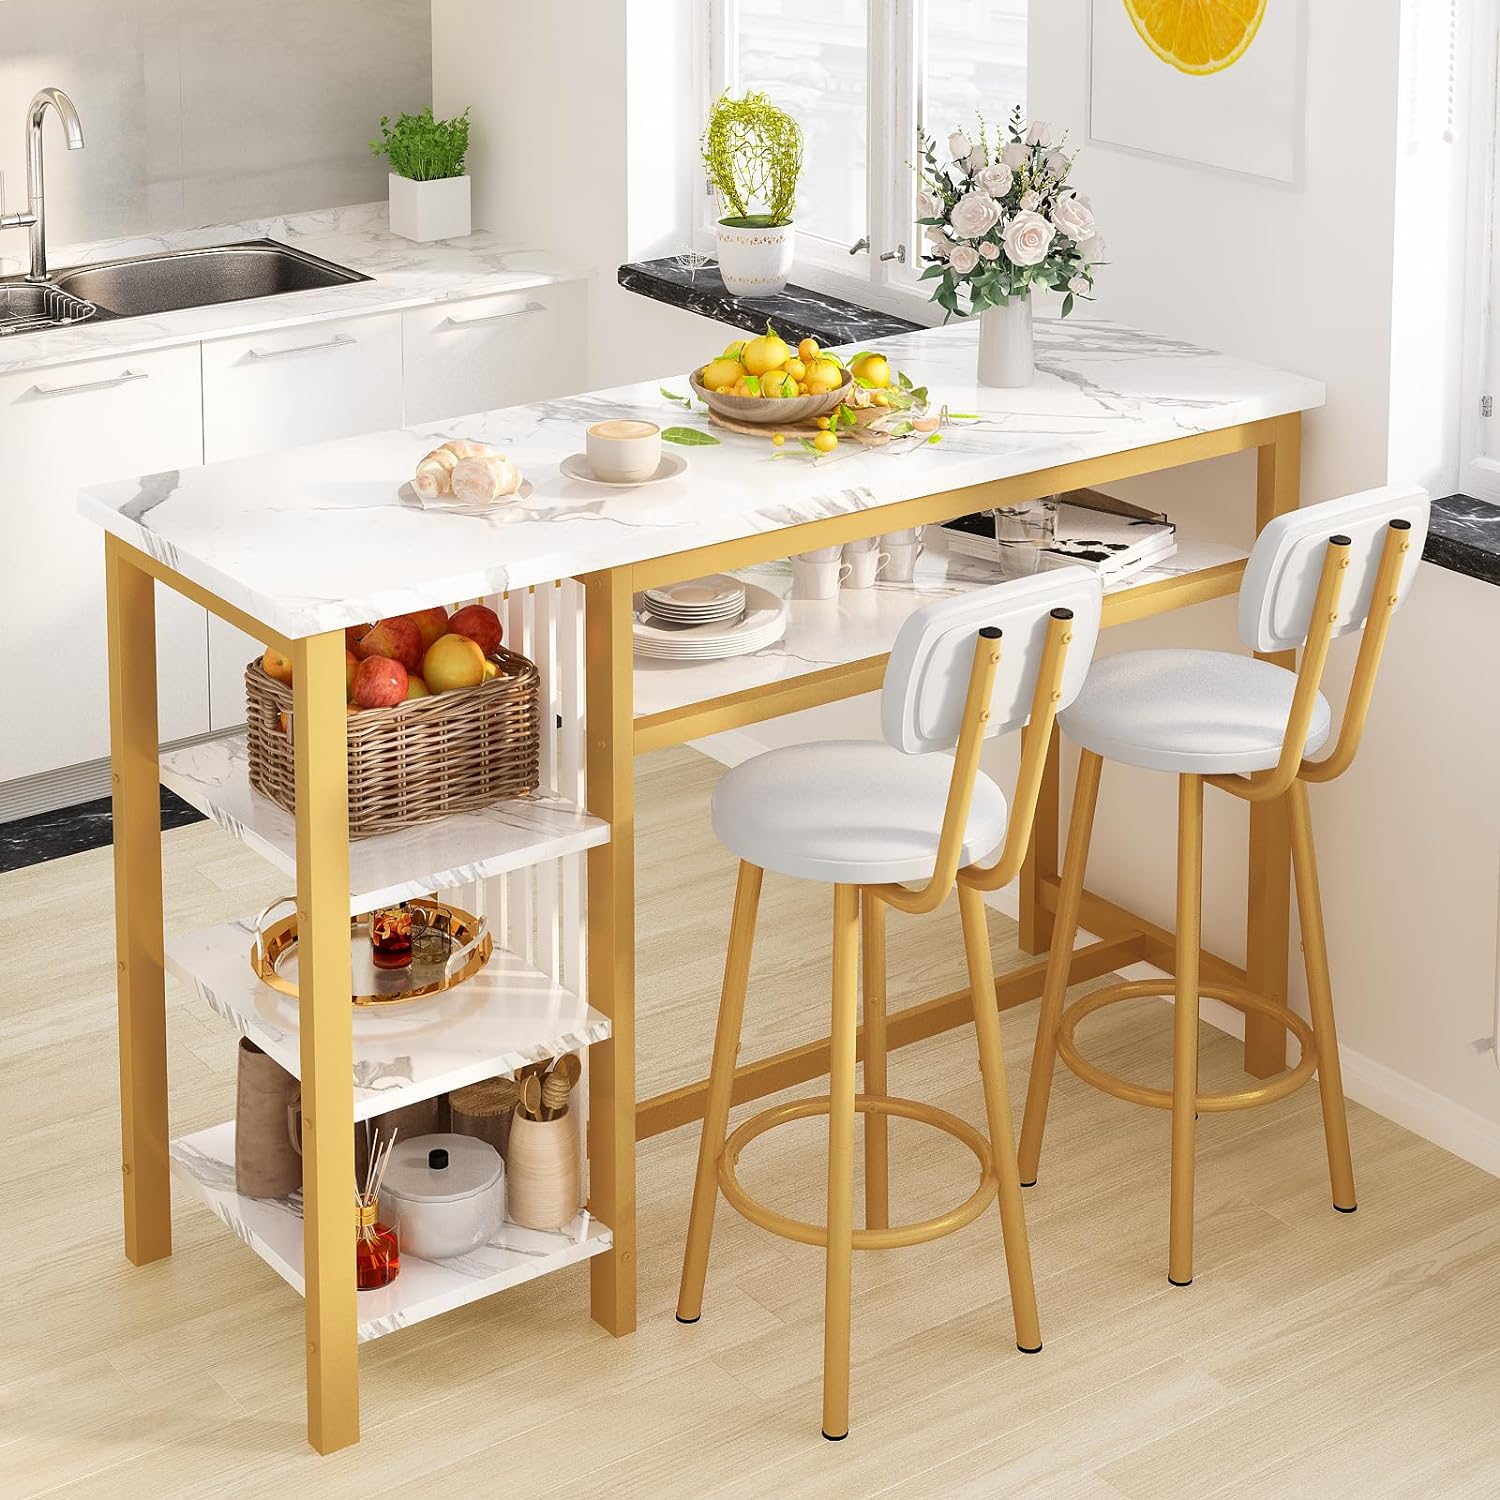 AWQM Bistro Table Set with Backrest Chairs